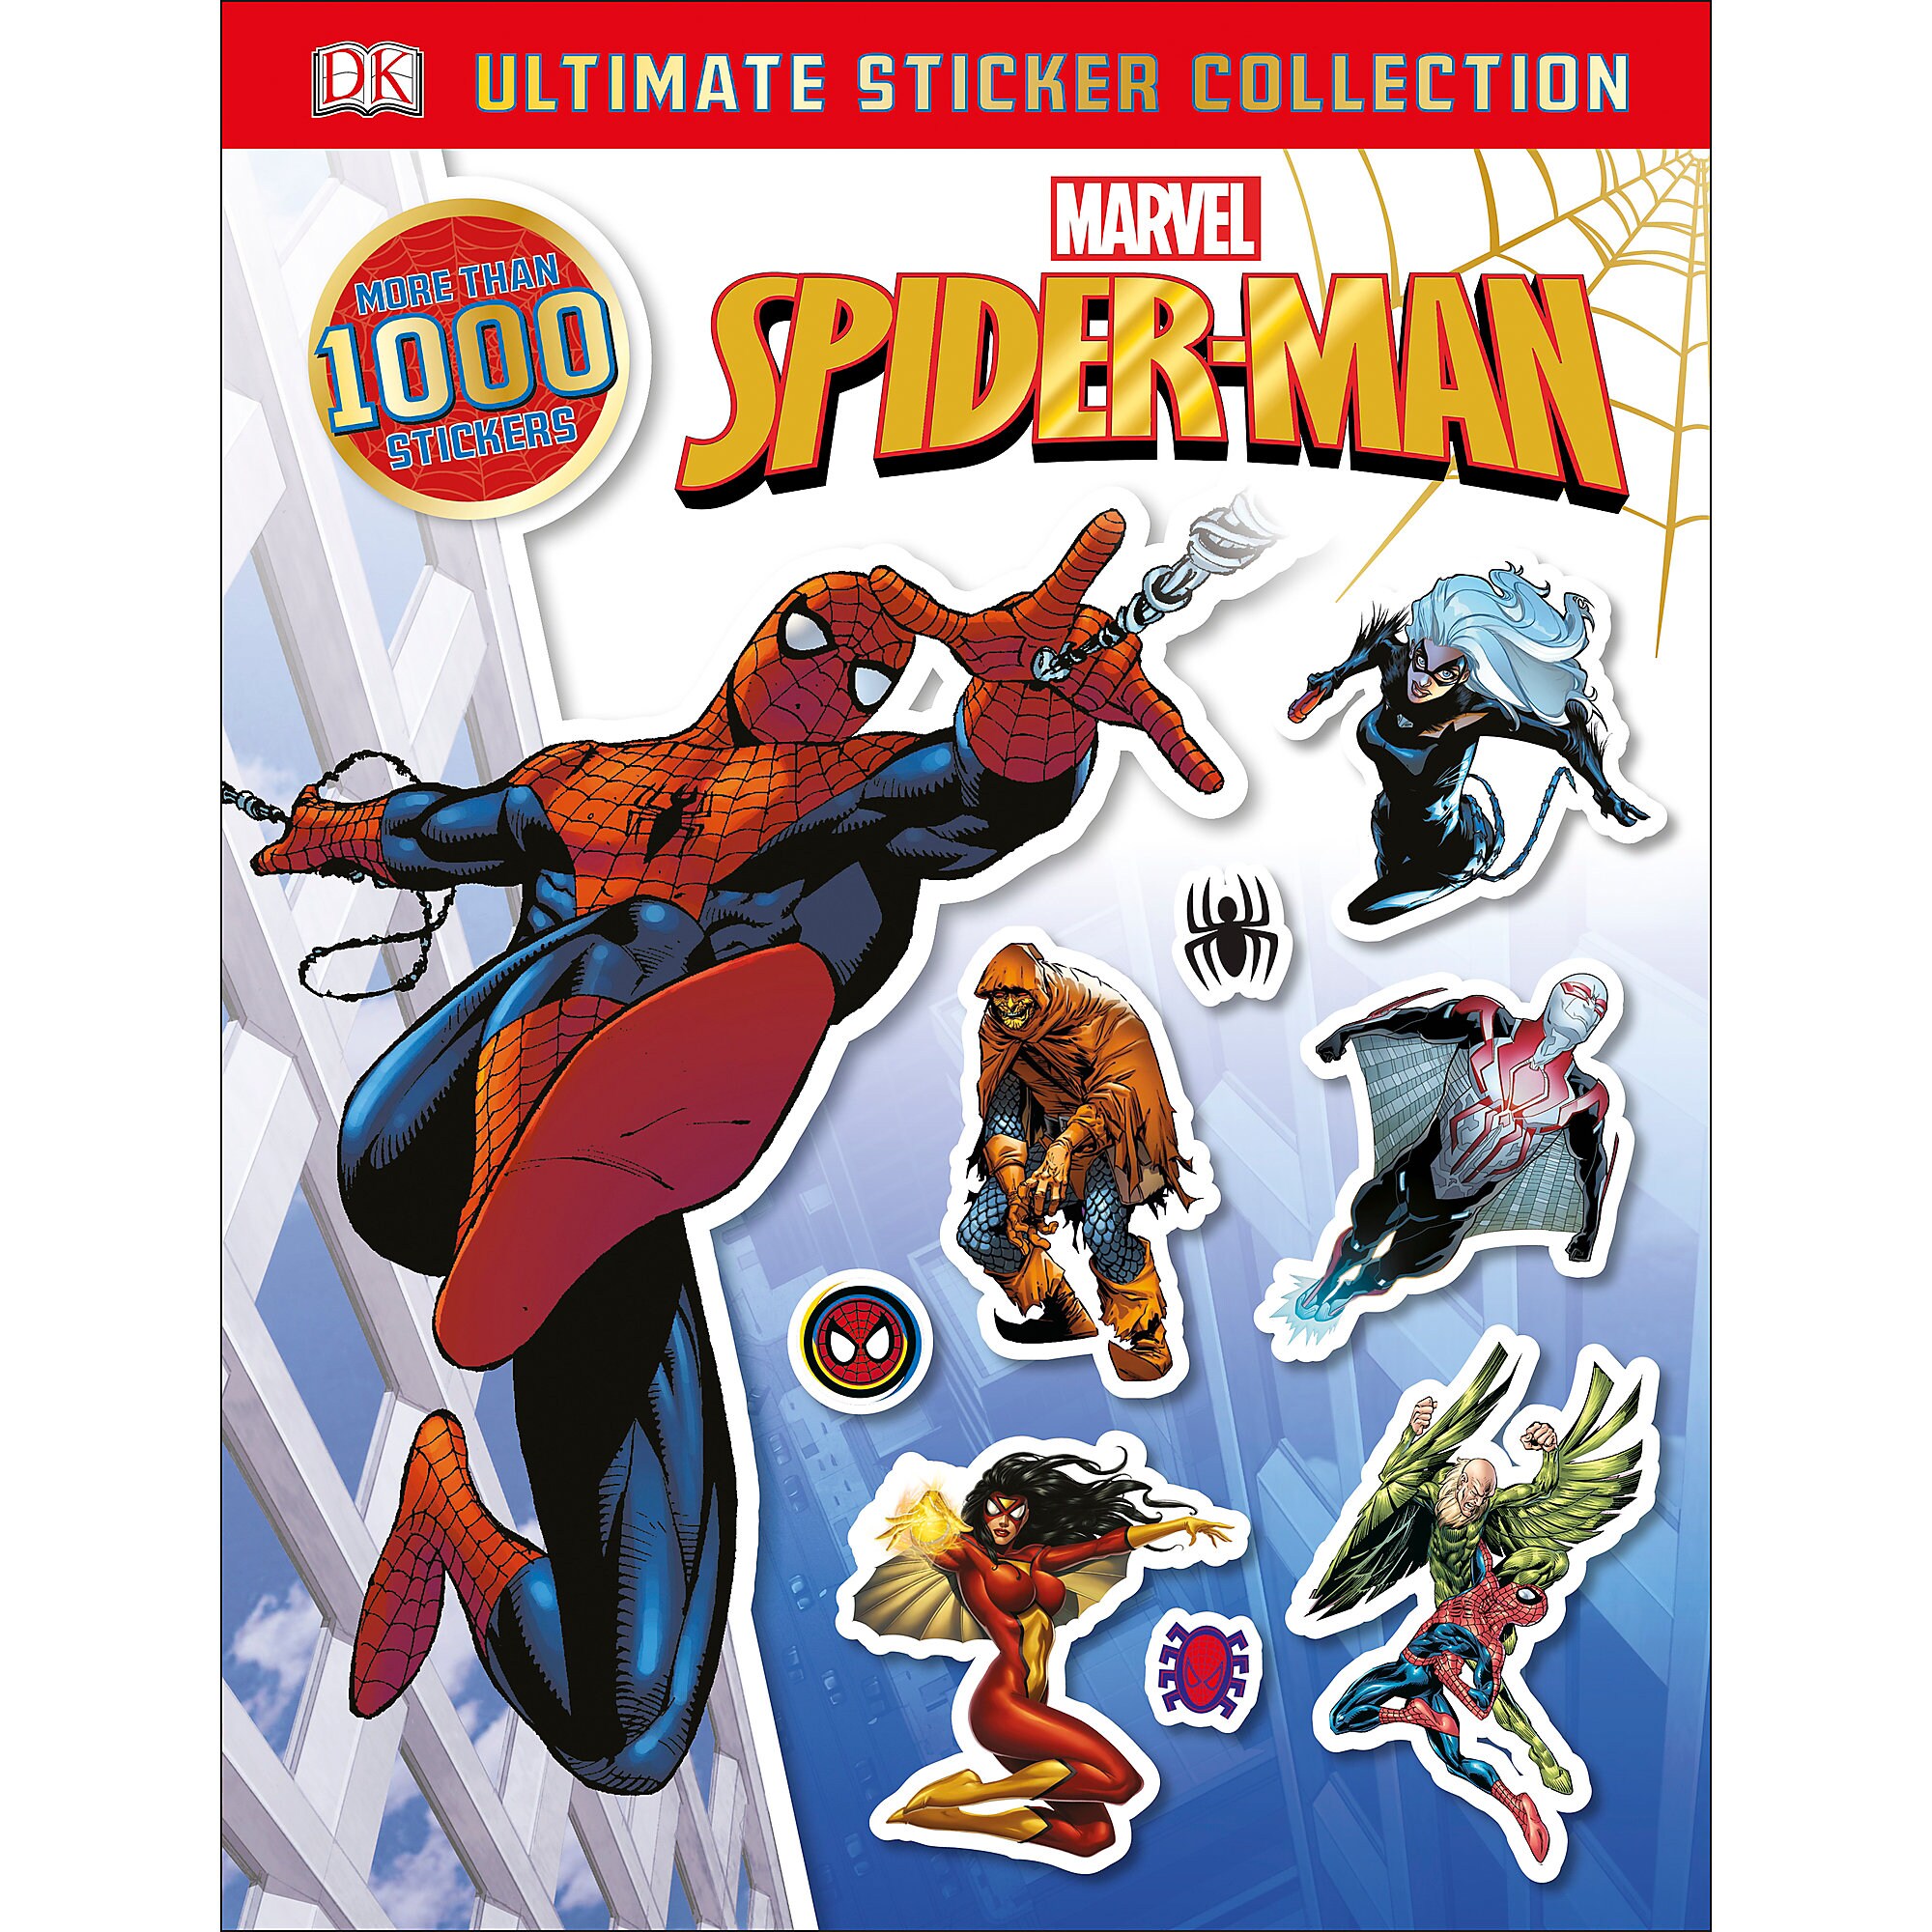 Spider-Man: Ultimate Sticker Collection